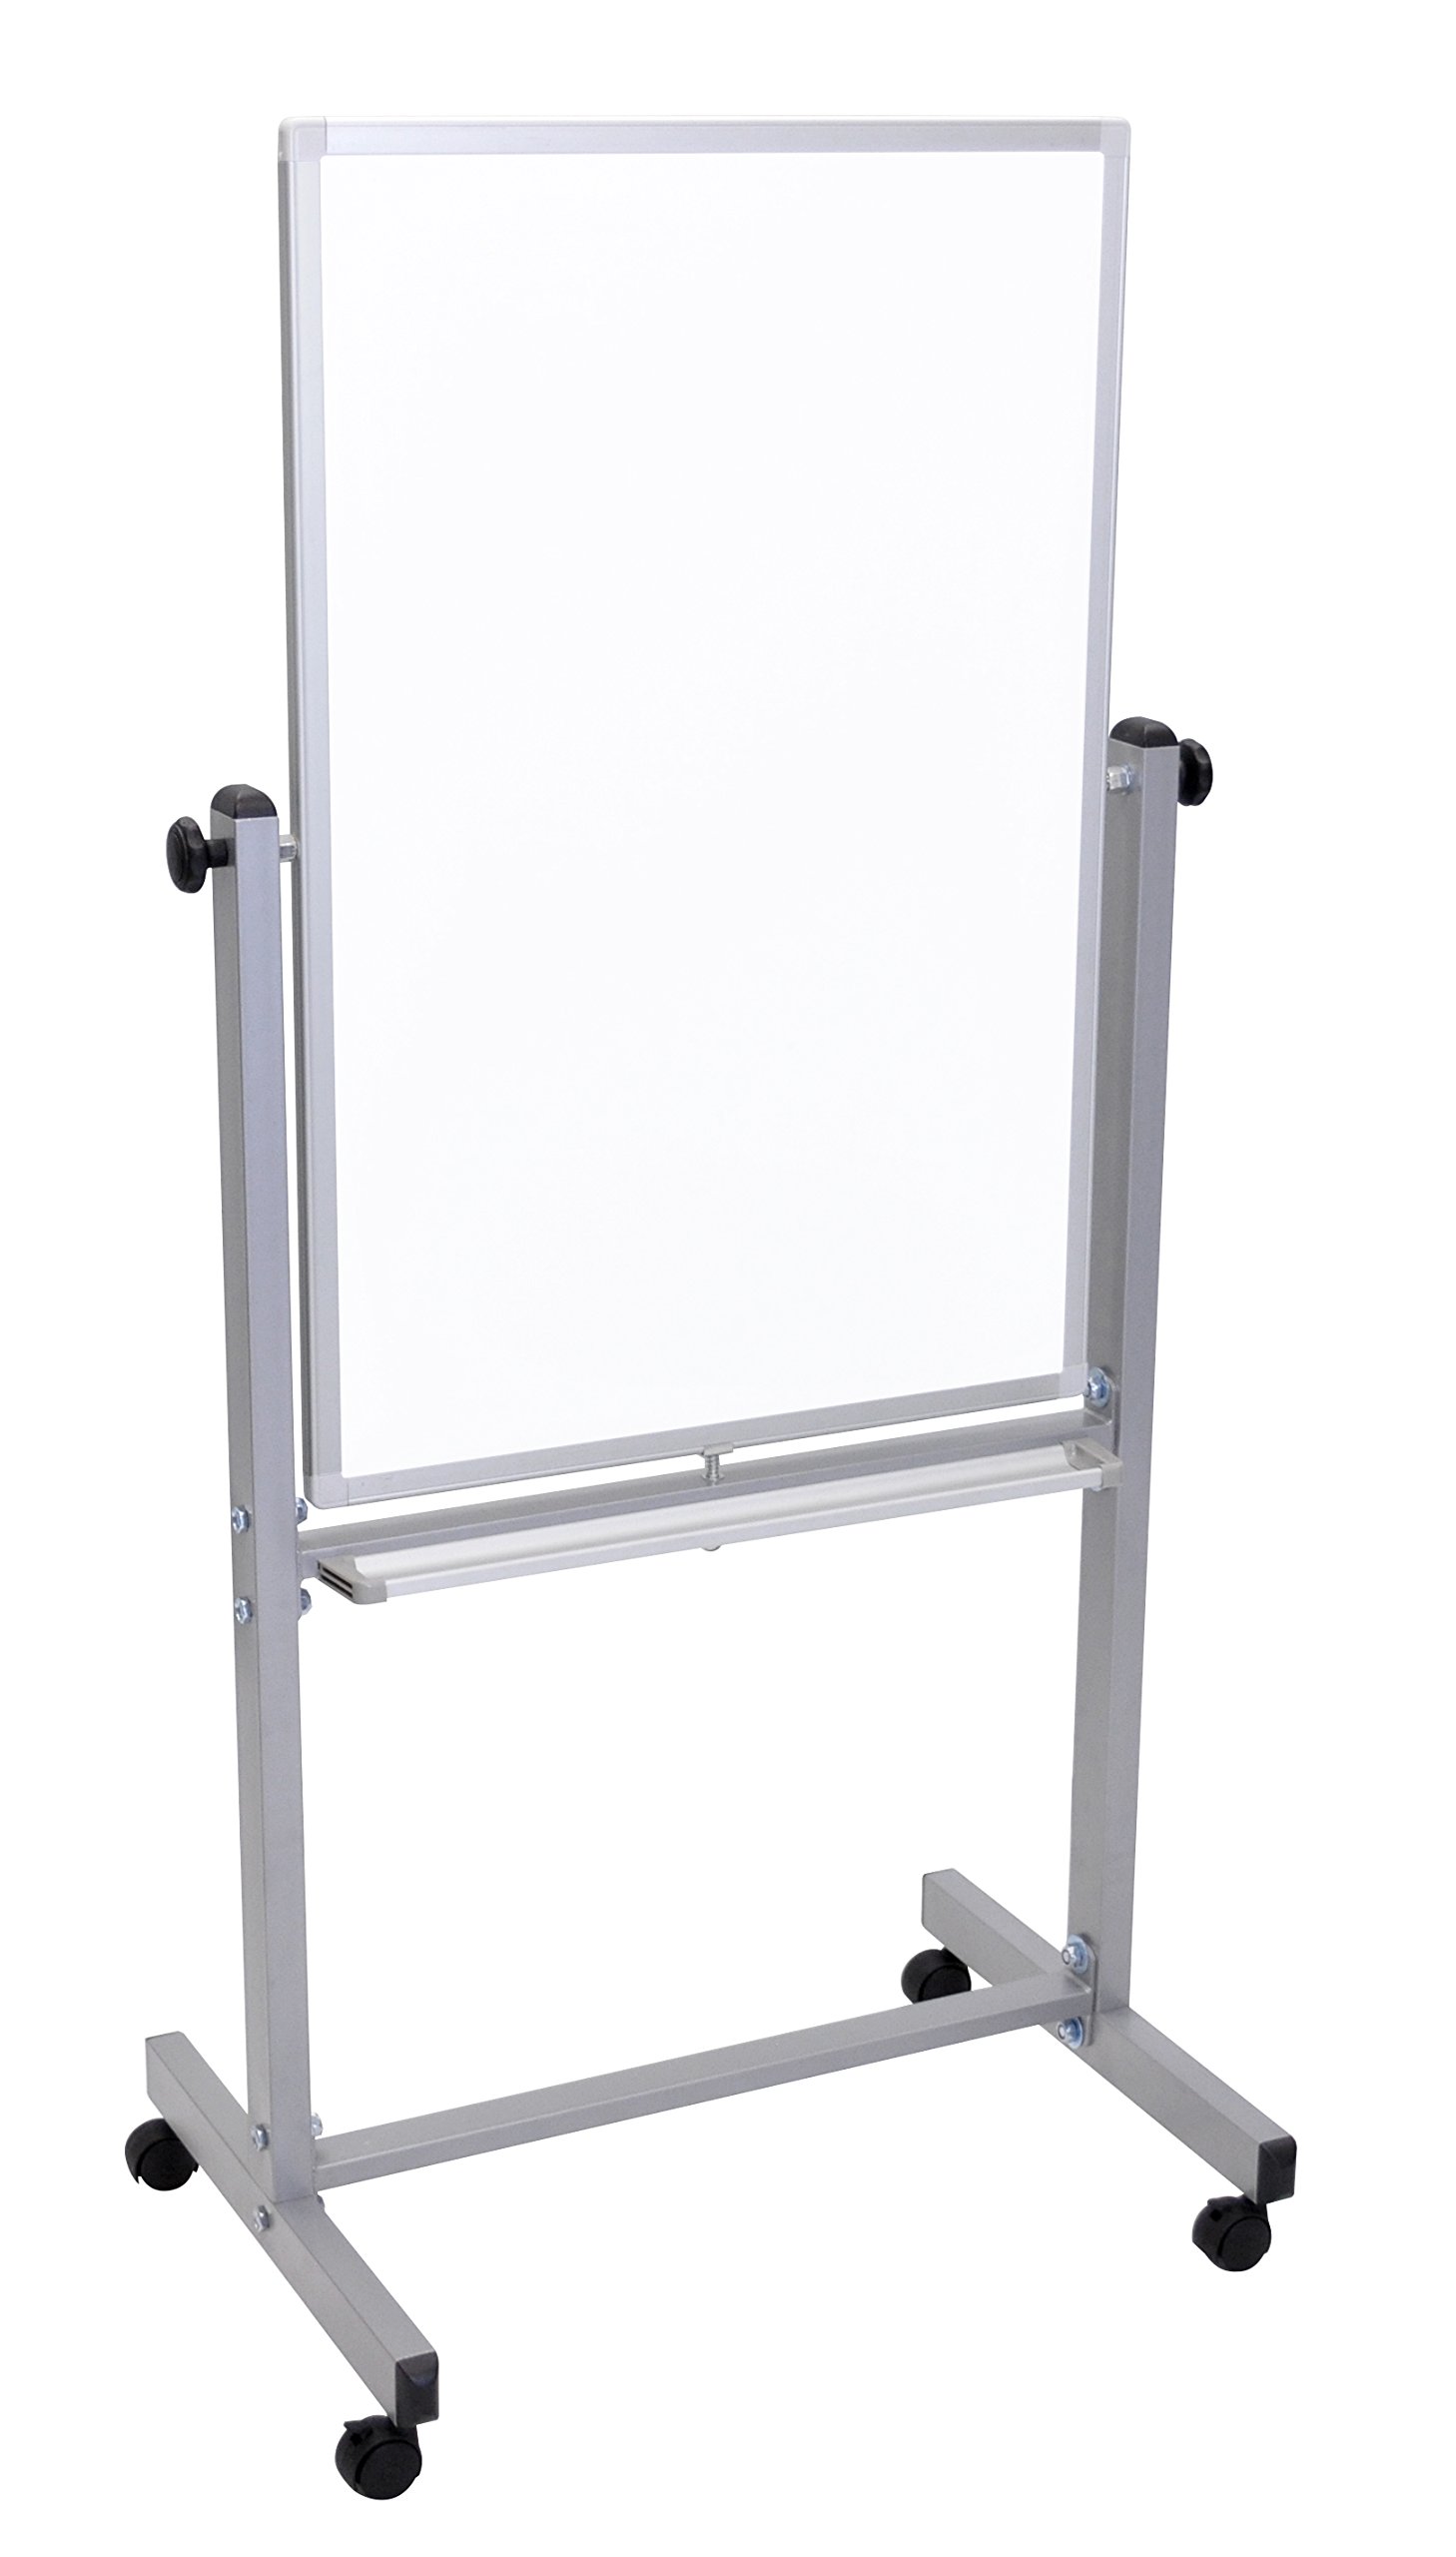 LUXOR Mobile Dry Erase Double-Sided Magnetic Whiteboard with Aluminum Frame and Stand